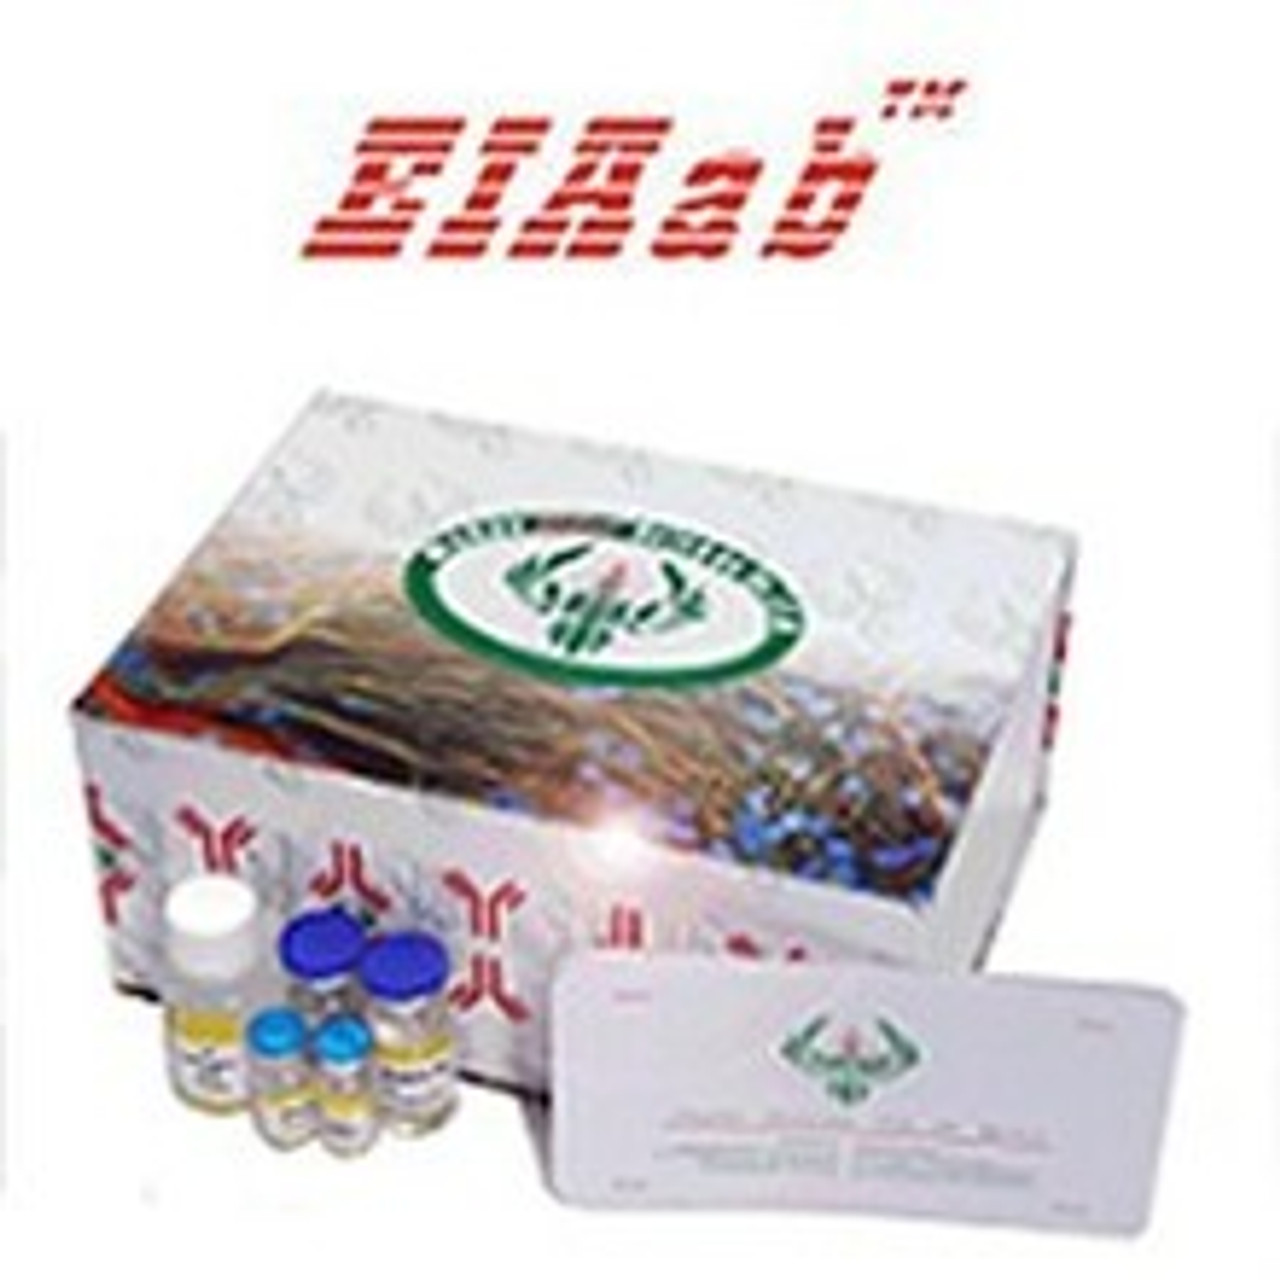 Human CD3G/T-cell surface glycoprotein CD3 gamma chain ELISA Kit